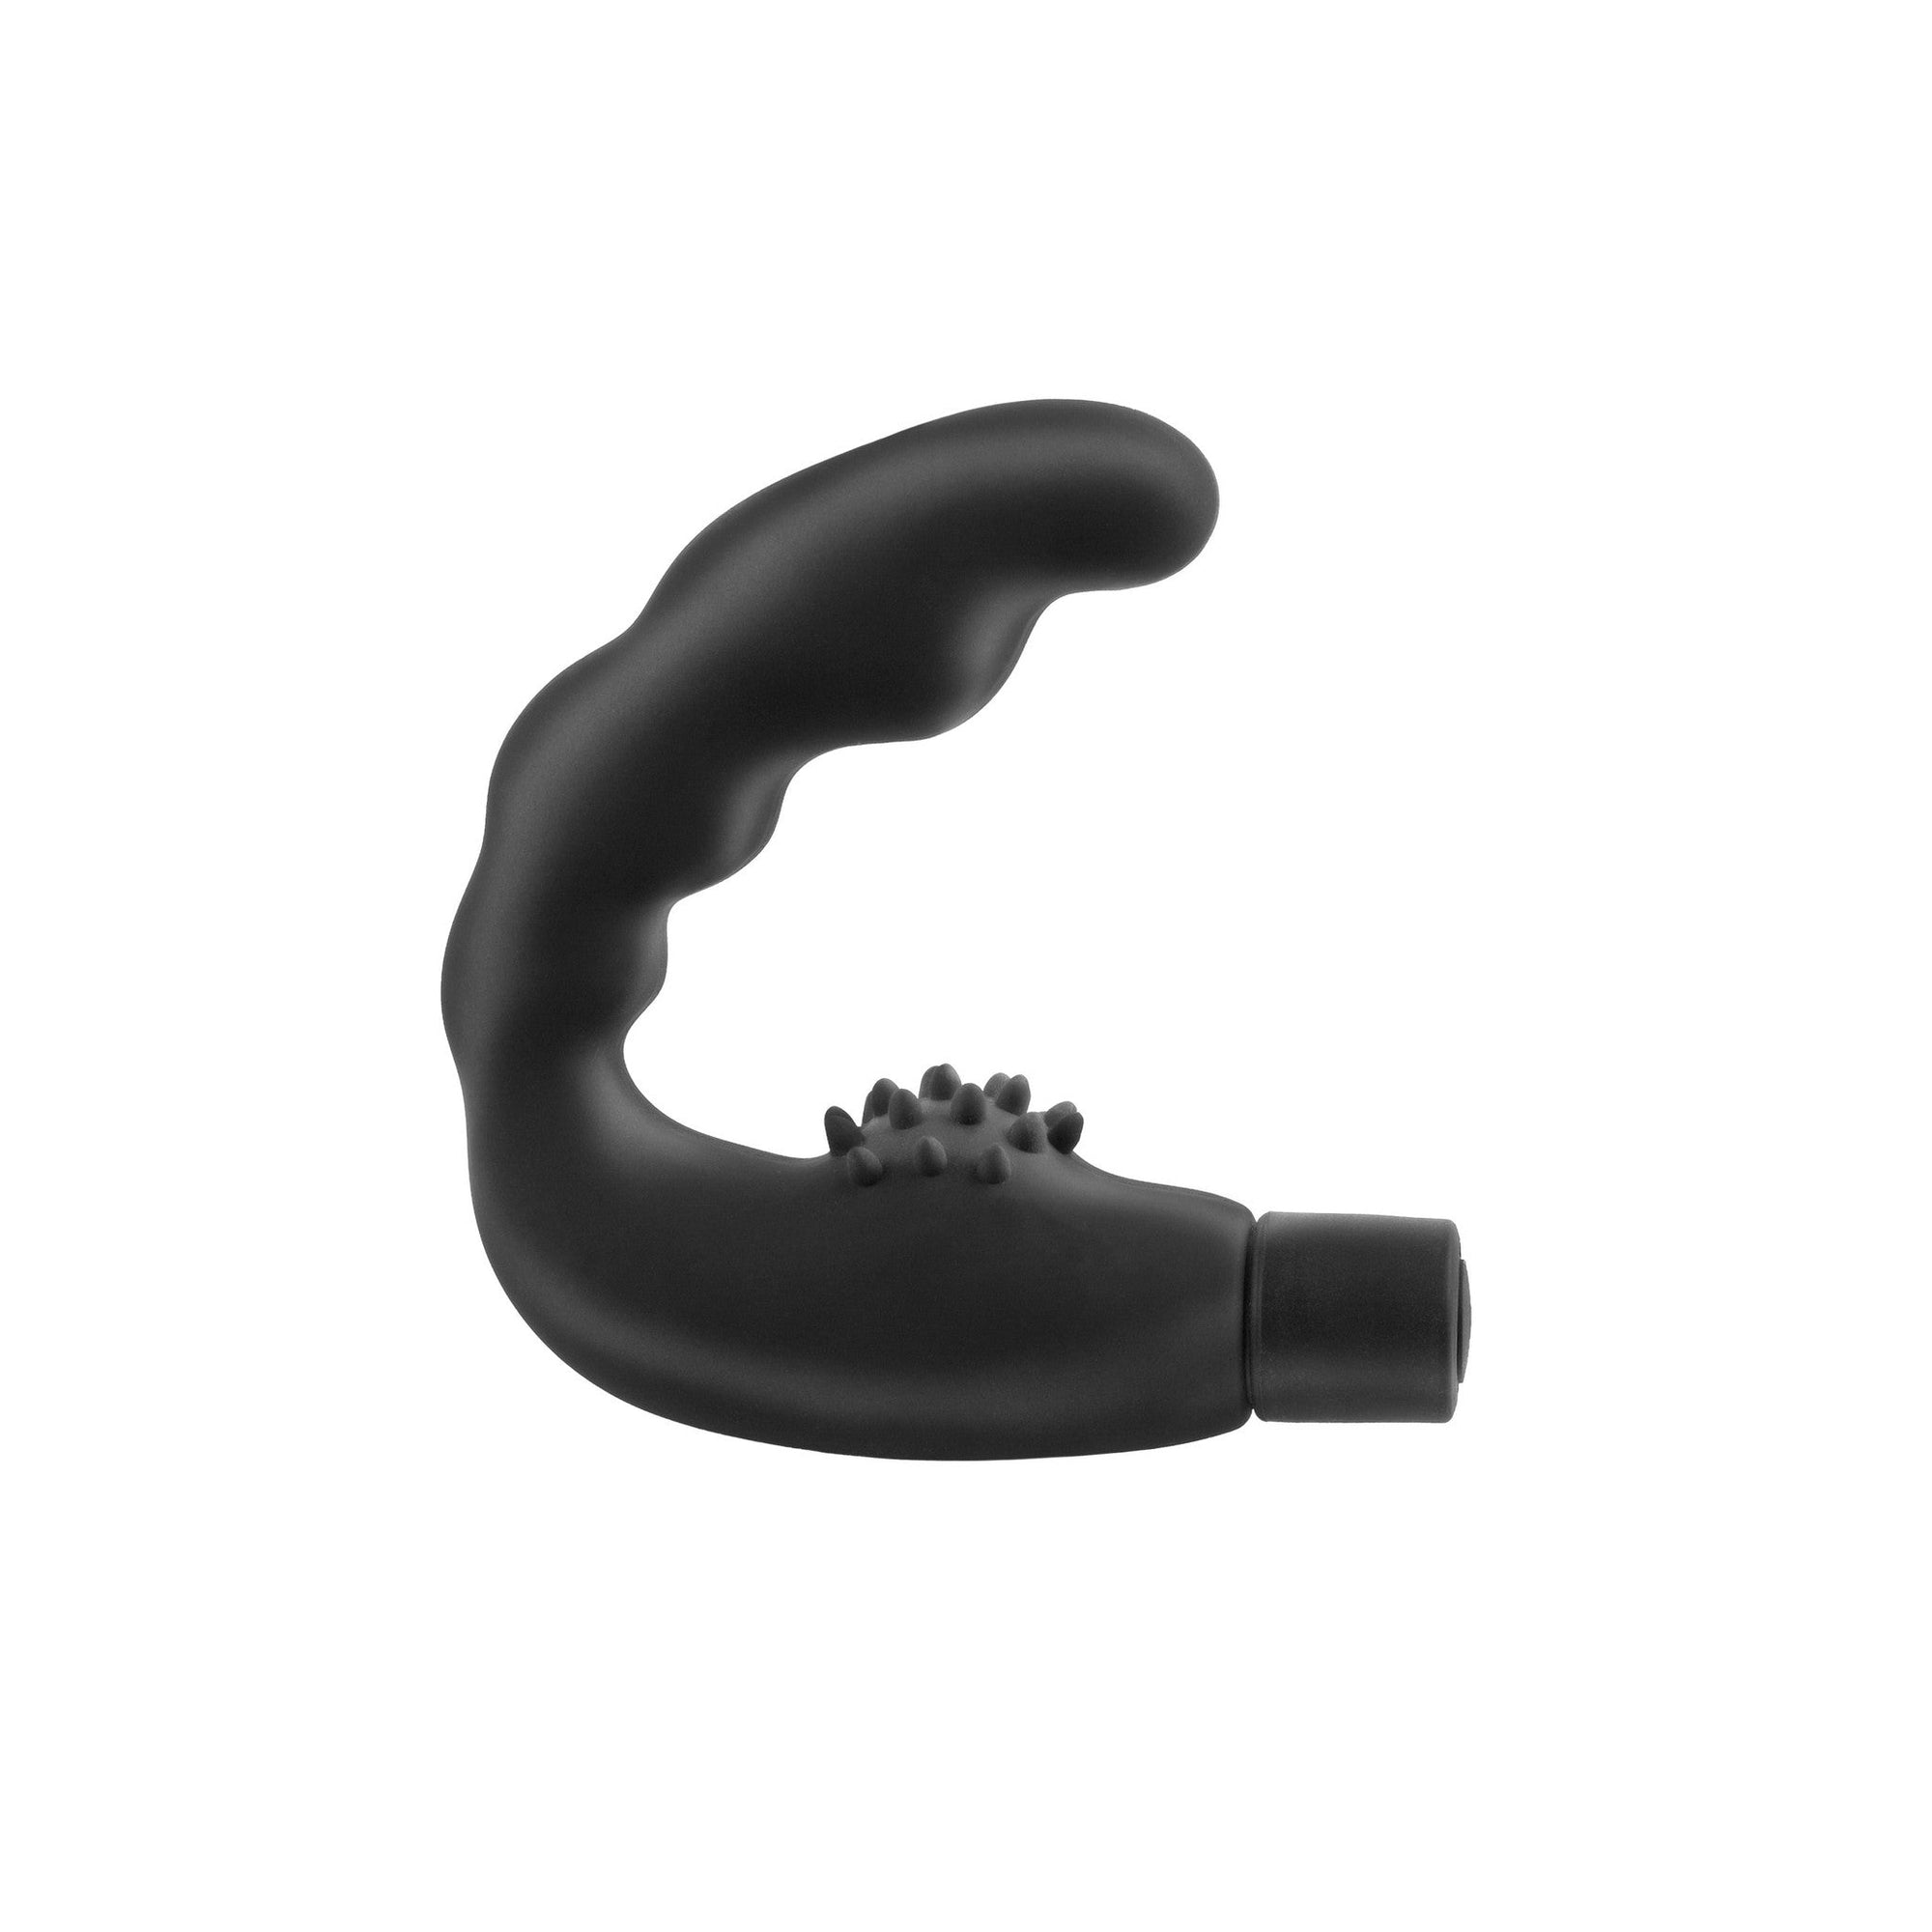 Pipedream - Anal Fantasy Collection Vibrating Reach Around -  Prostate Massager (Vibration) Non Rechargeable  Durio.sg